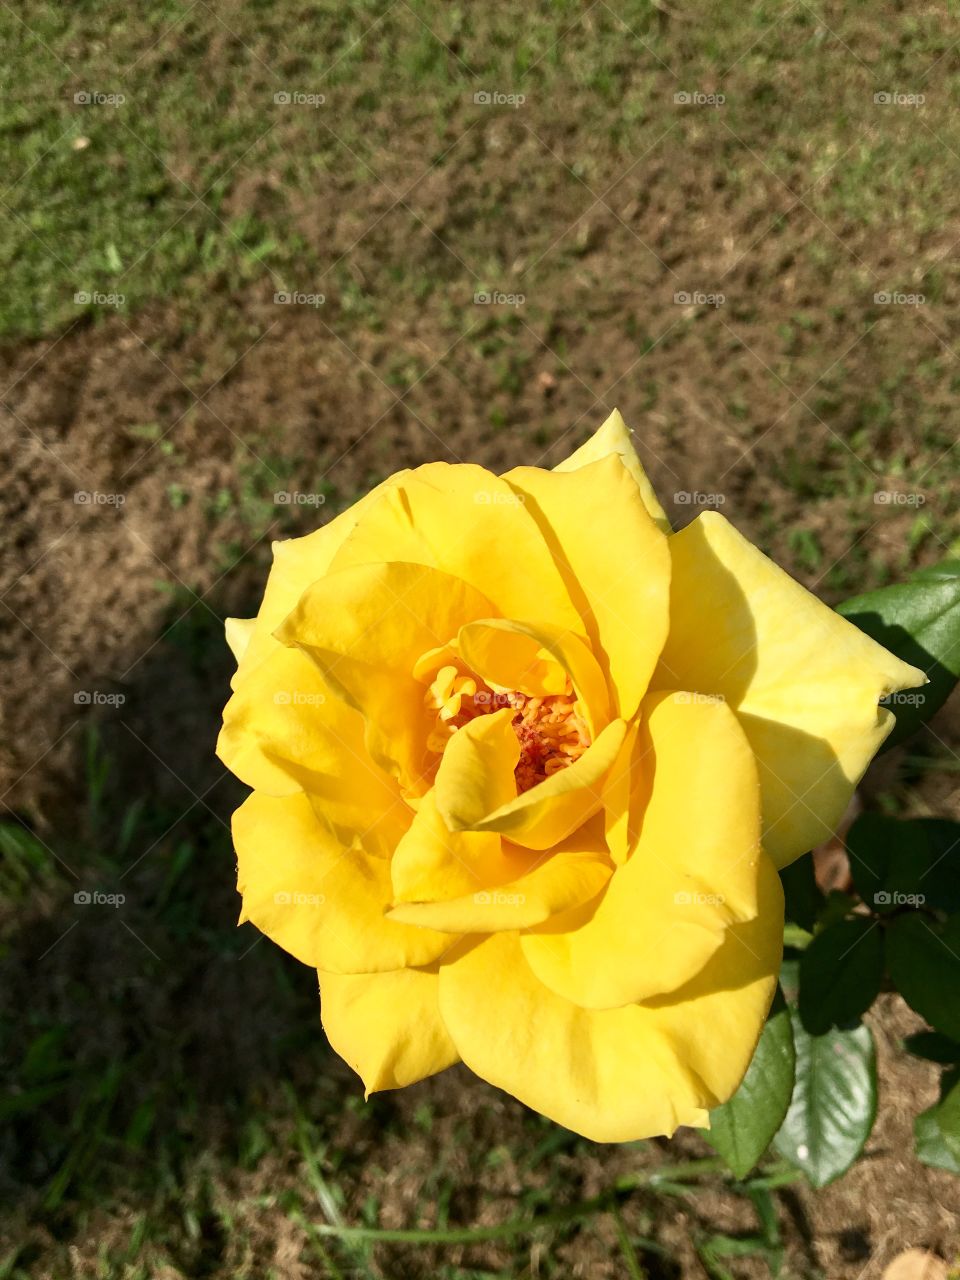 The yellow rose of Texas